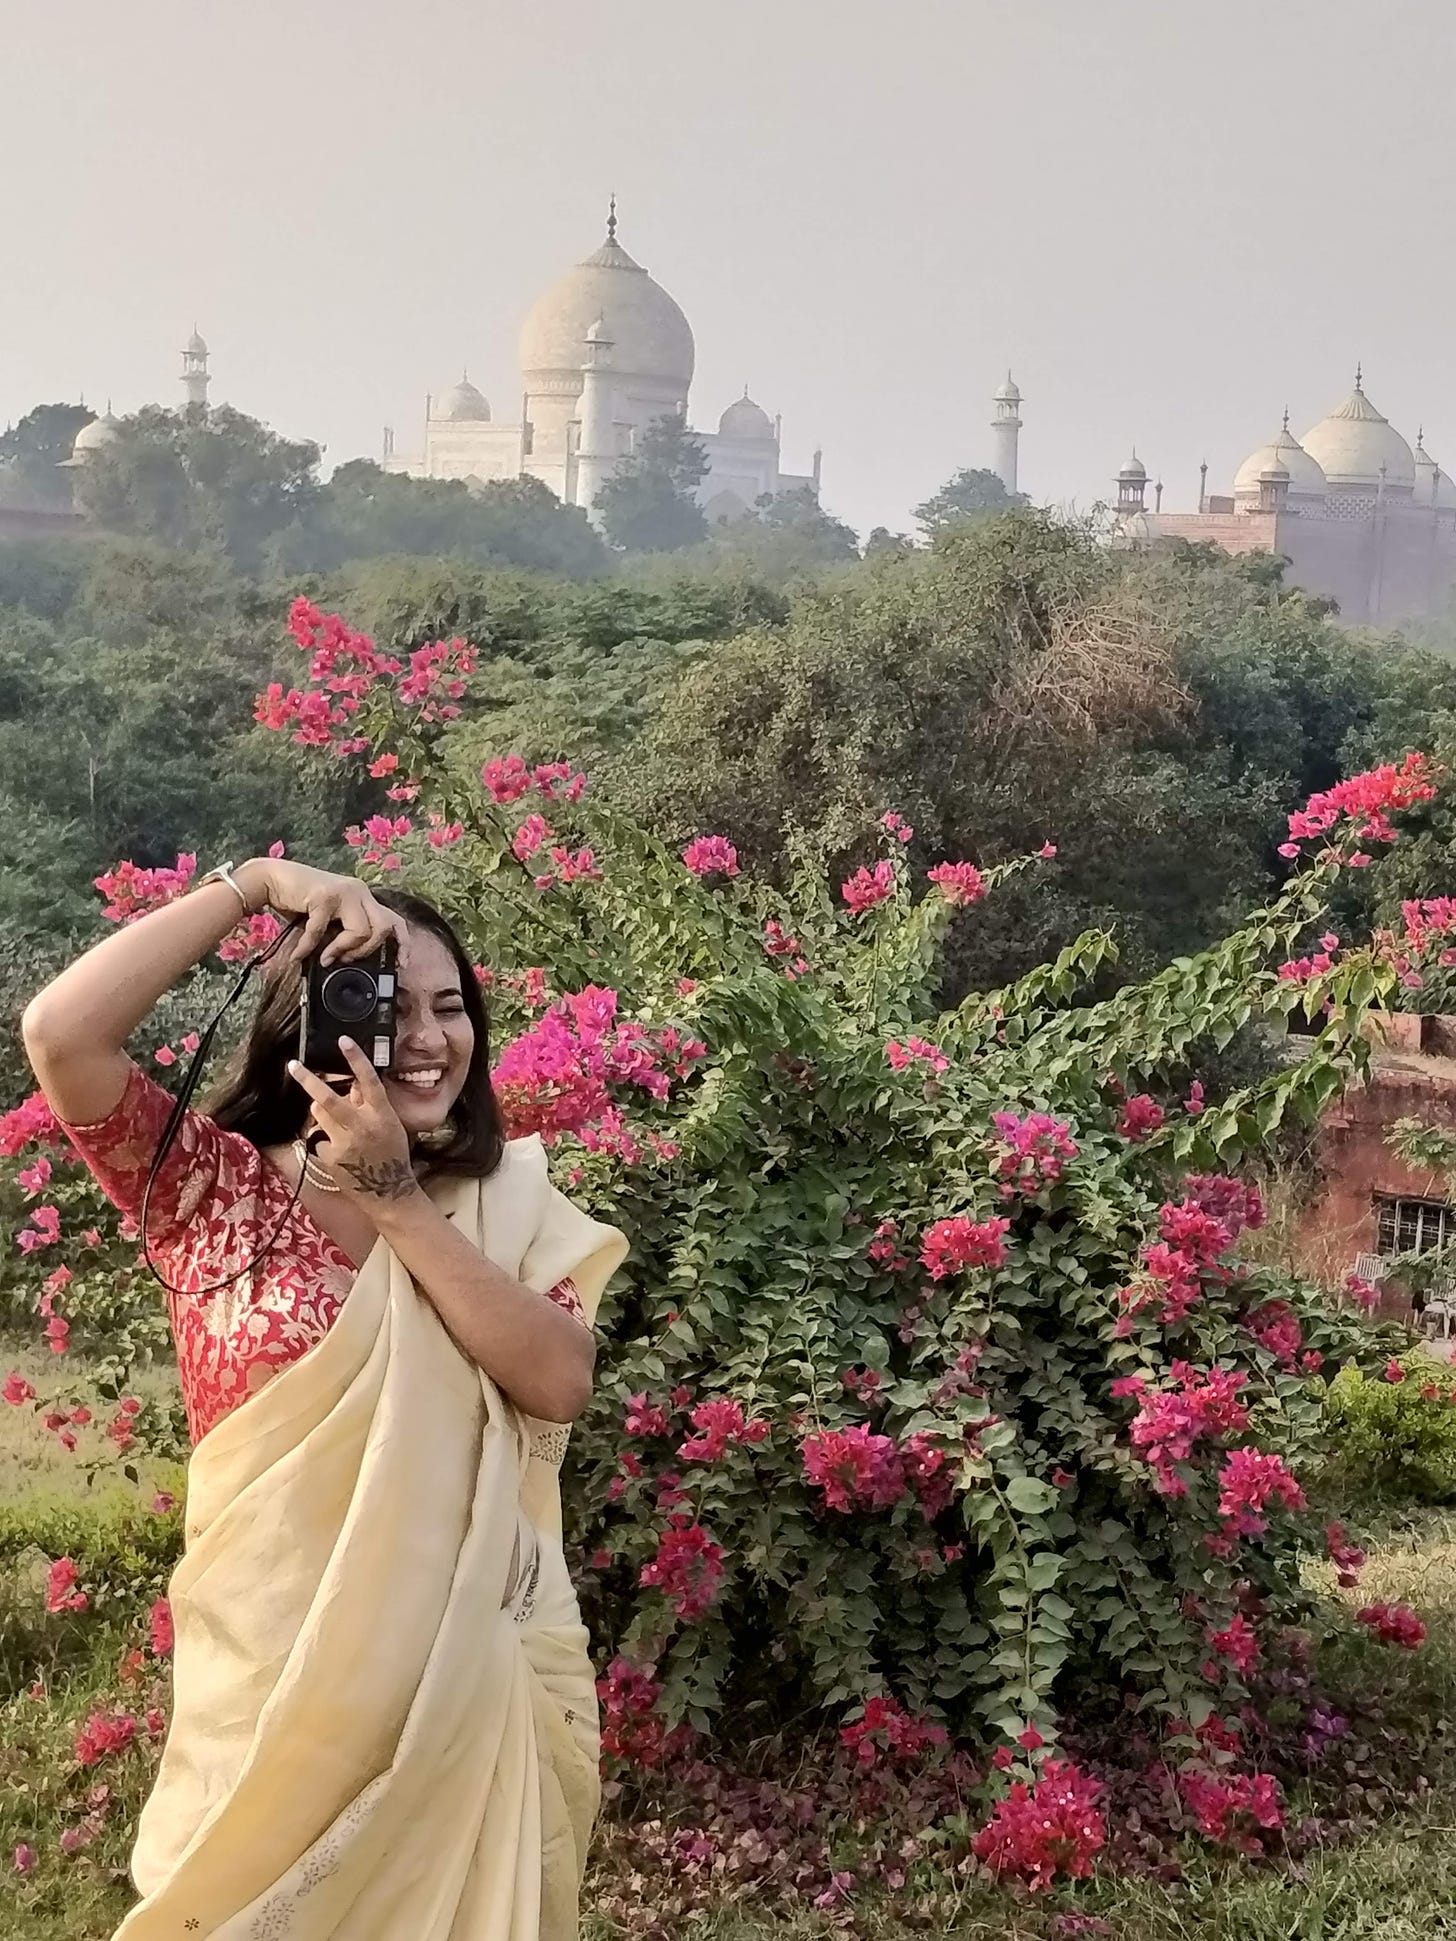 a woman in a beige saree, taking a picture of the photographer with an old film camera, in front of a bougainvillea. in the distance the taj mahal is visible